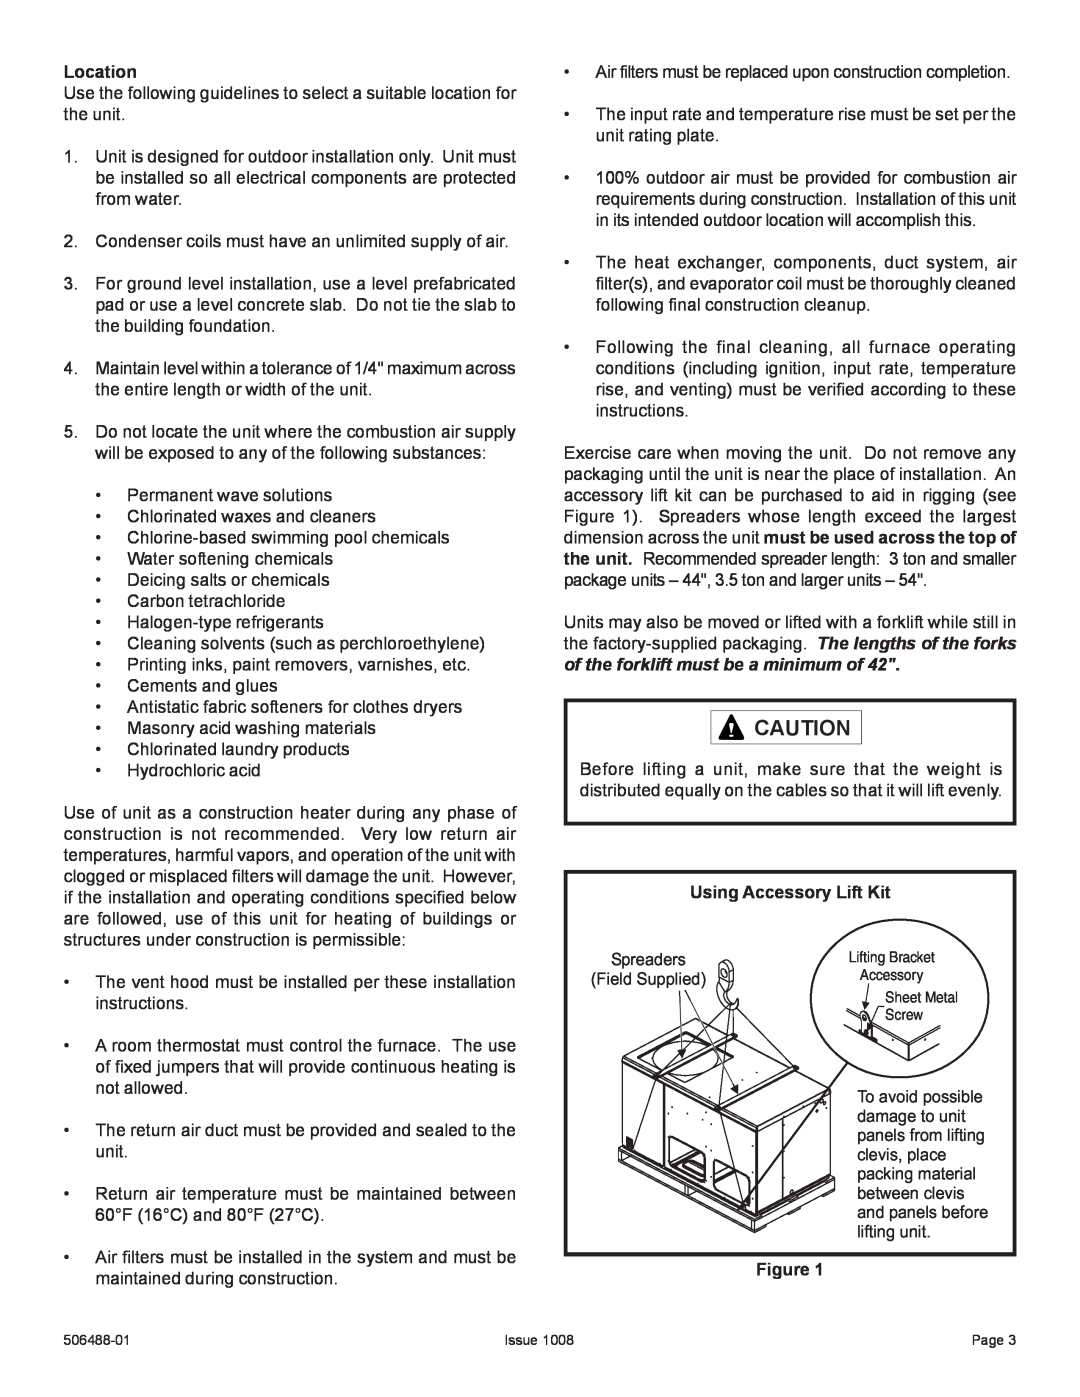 Allied Air Enterprises 4PGE manual Location, Using Accessory Lift Kit 